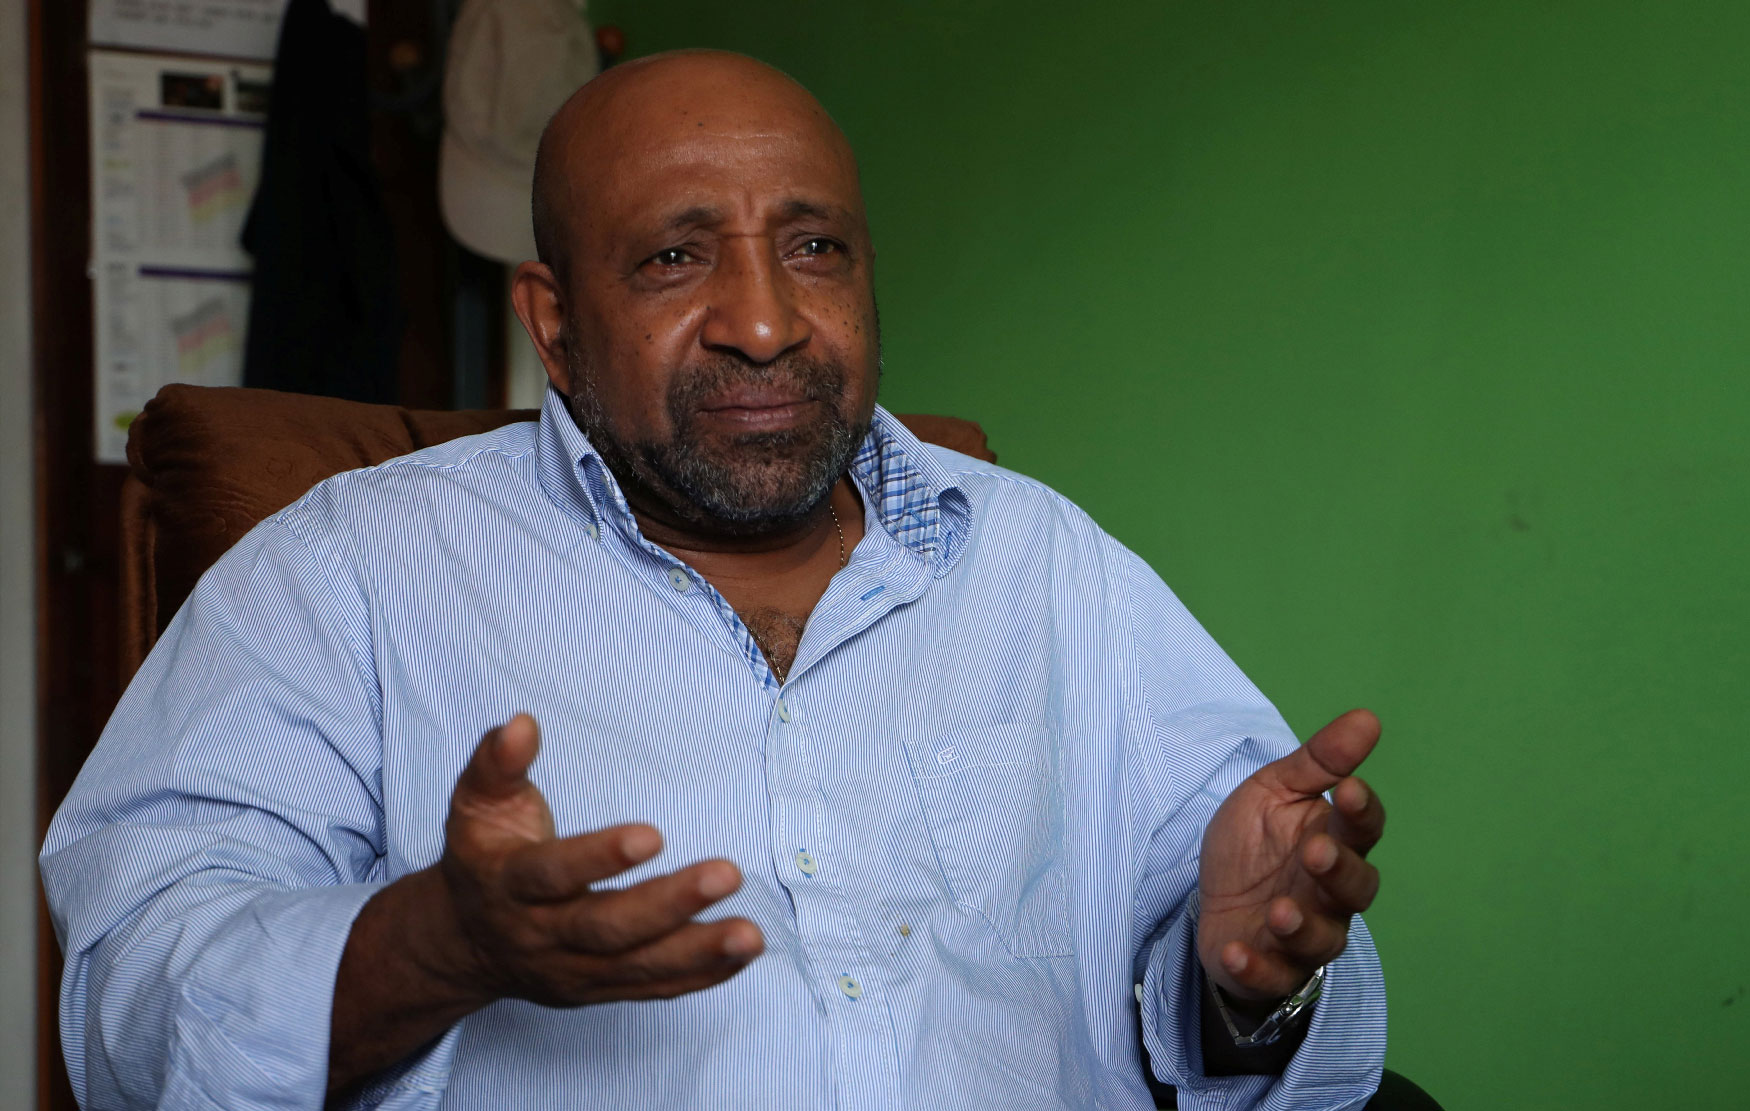 Berhanu Nega, an exiled Ethiopian Ginbot 7 rebel leader speaks during a Reuters interview at his office in Addis Ababa, Ethiopia October 19, 2018.